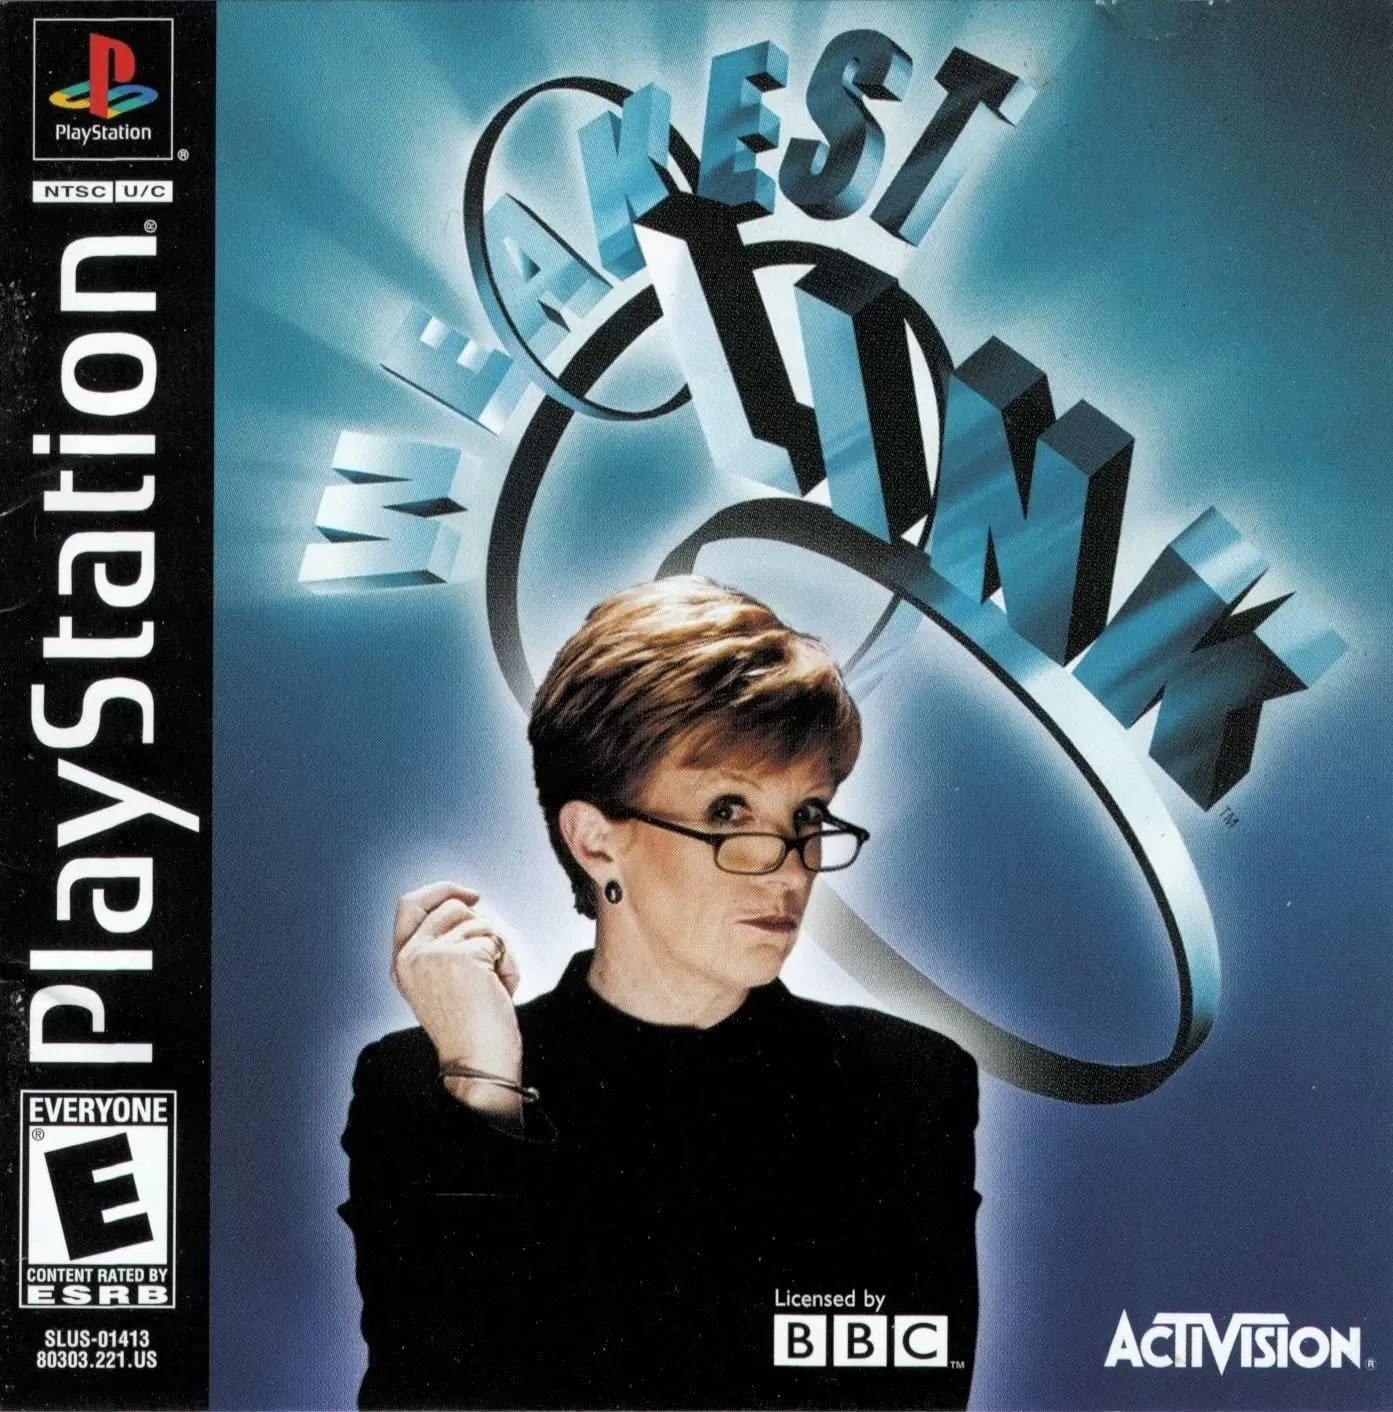 Playstation games - The Weakest Link